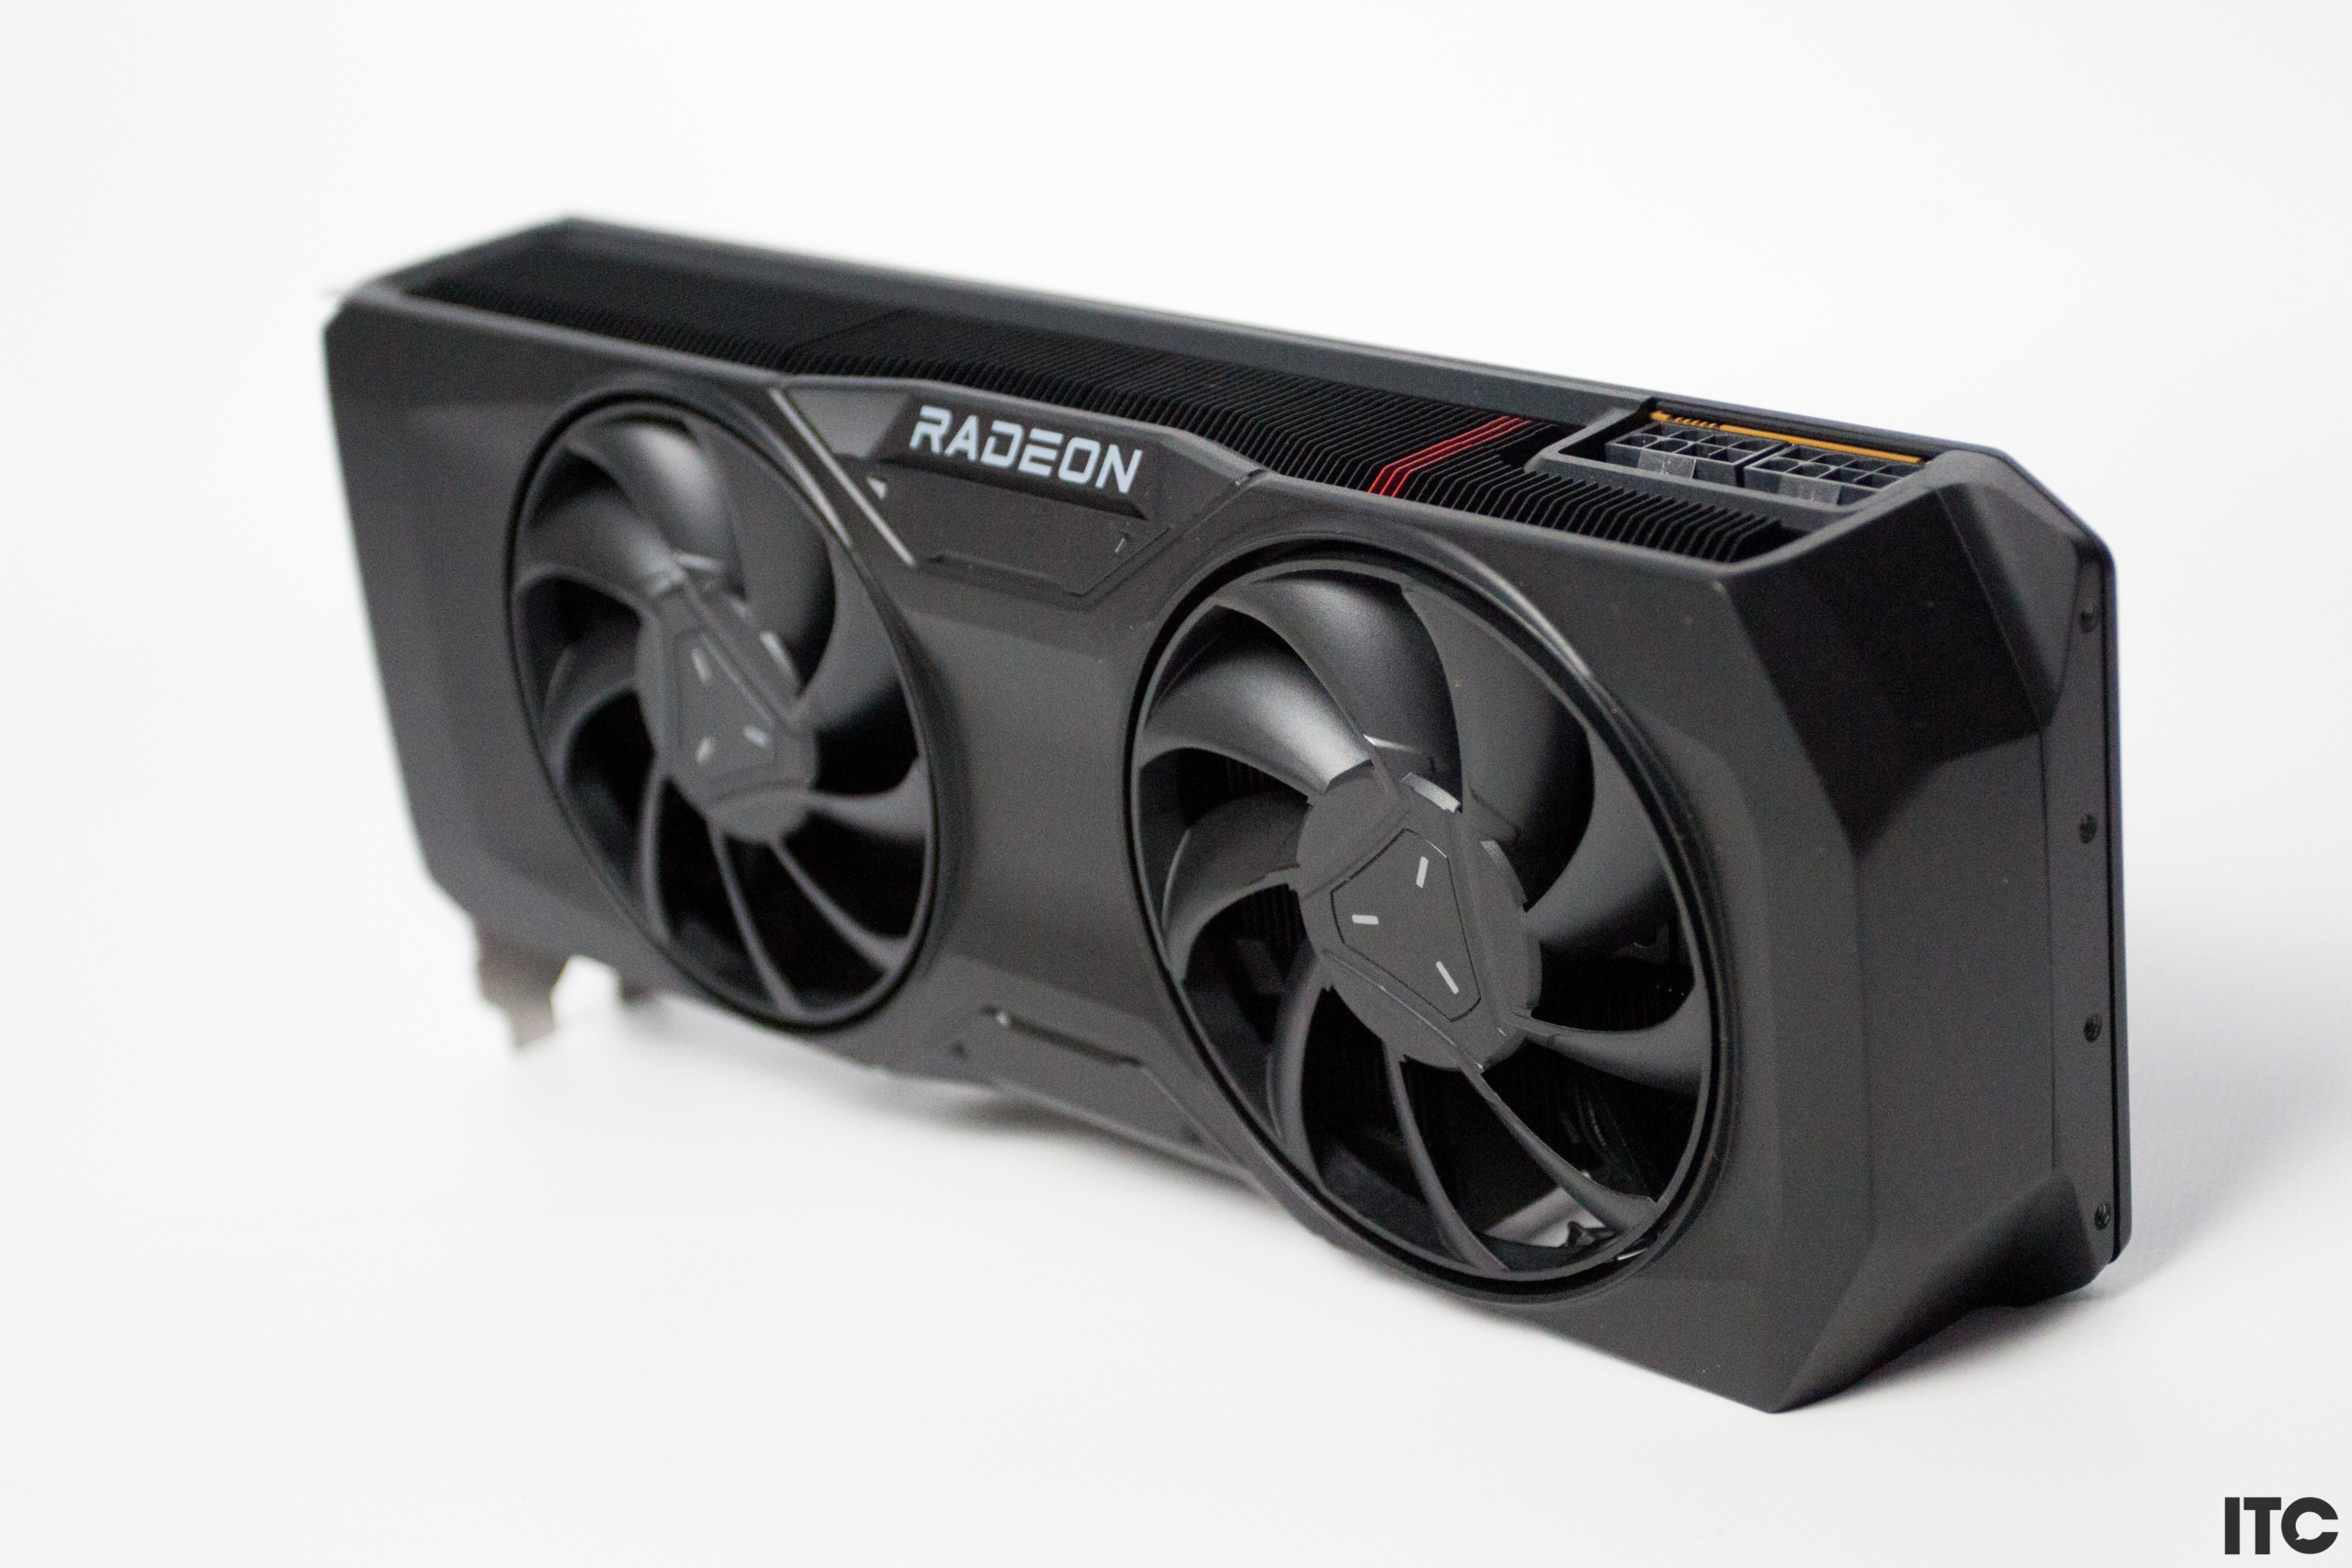 This Sapphire RX 7800 XT in white is down to £499 with an  code